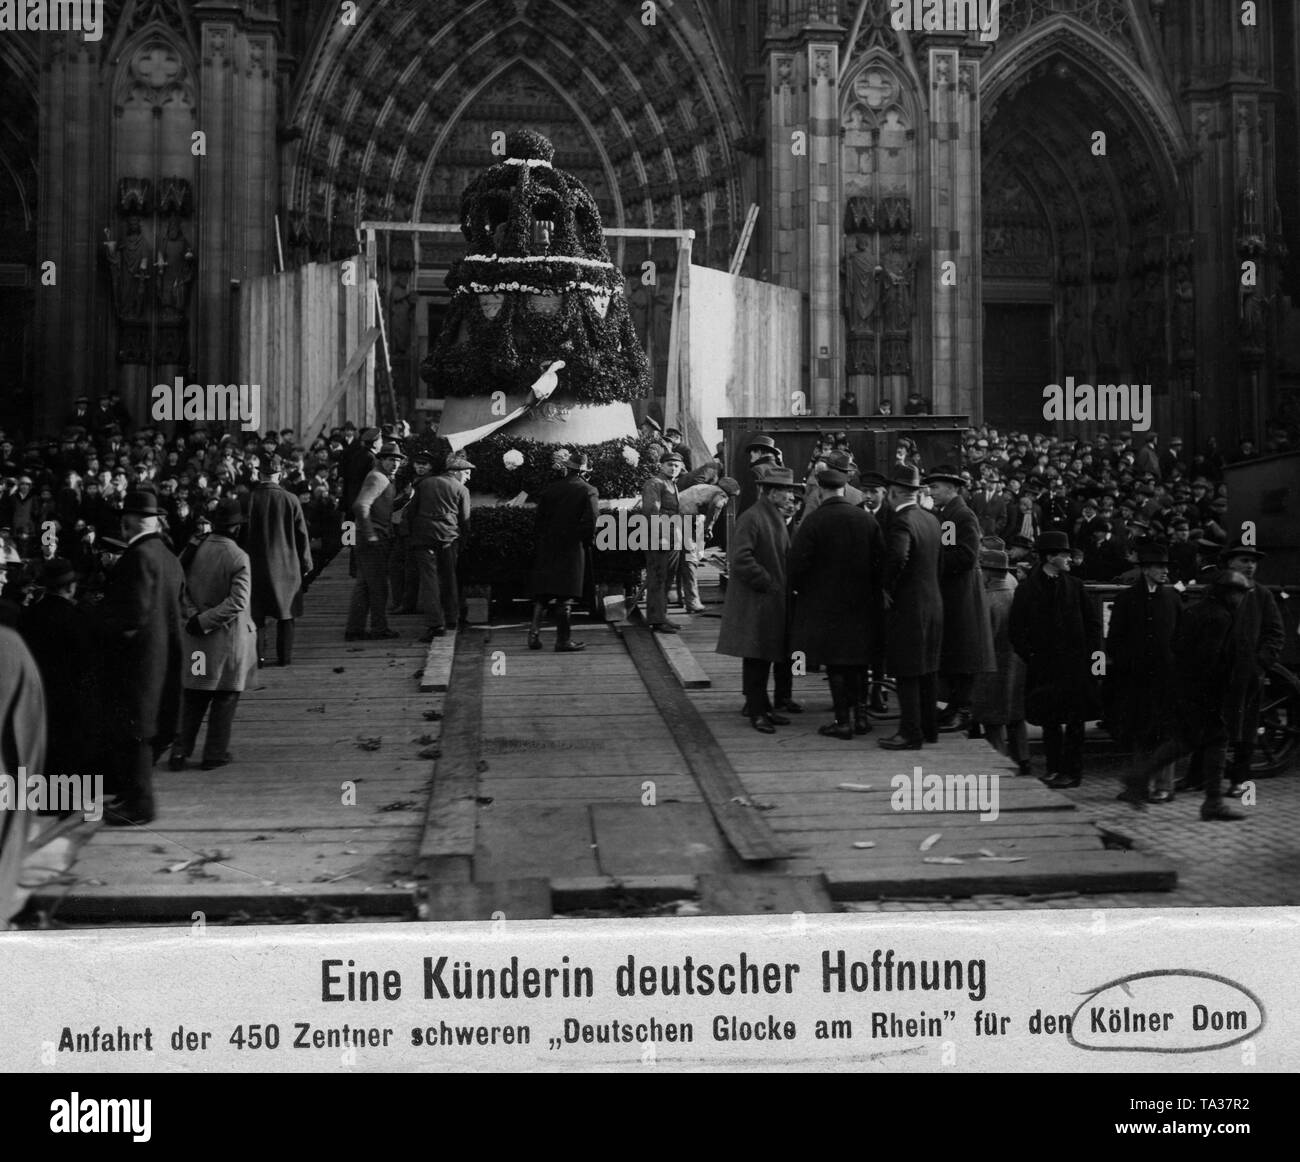 Arrival of the new bell for the Cologne Cathedral, the 'Deutsche Glock am Rhein', on 14.11.1924. The bell is decorated with flowers. At the bell, the workers who brought it to the South Tower. Left and right, the ramp with which it was transported to the Cathedral, spectators.In the background, the portals of the Cathedral. Stock Photo